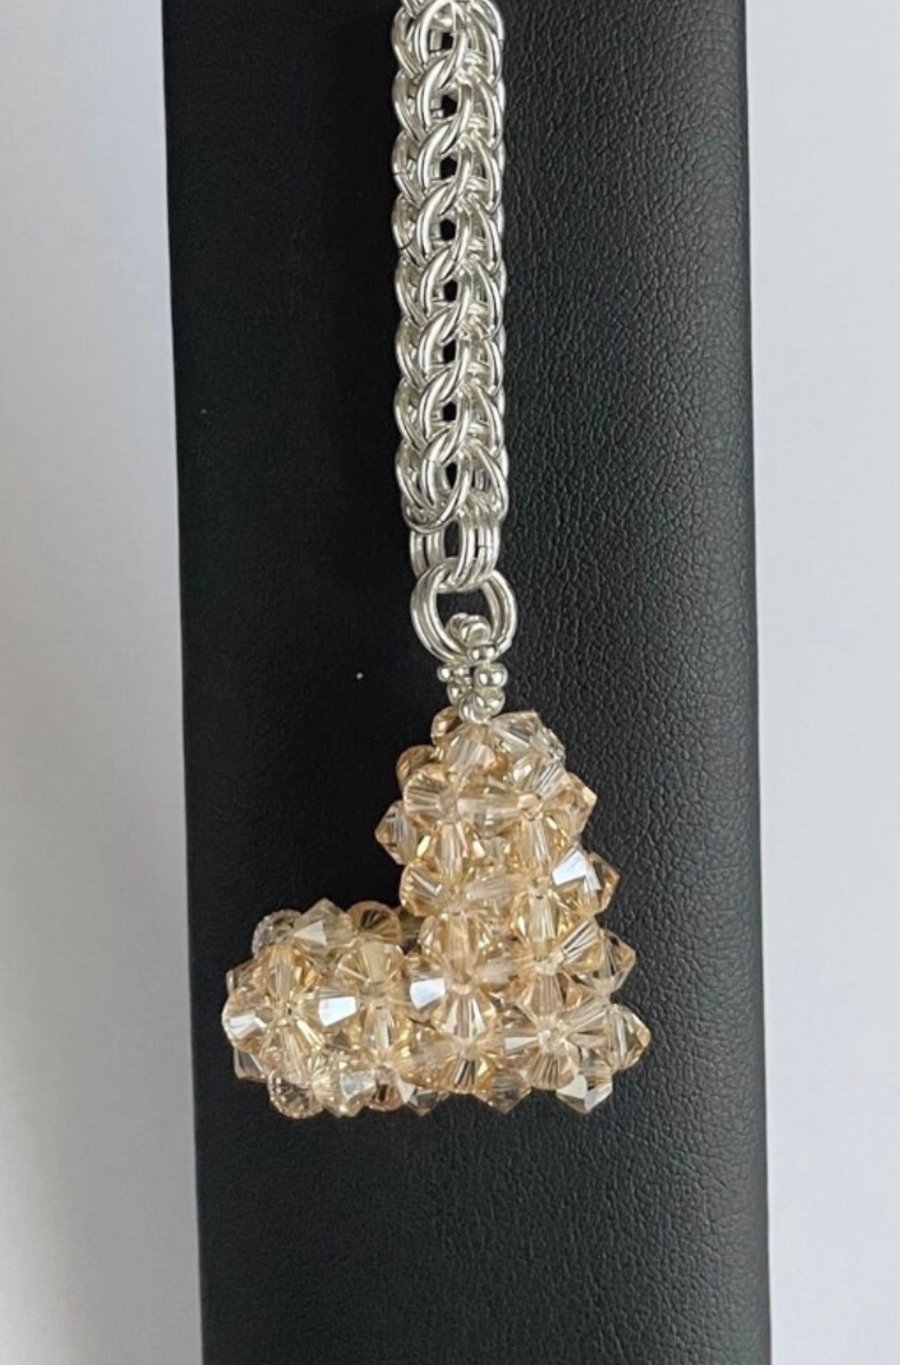 Handbag Charm, Golden Crystal Puffed Heart, with a Chainmaille Chain and Keyring